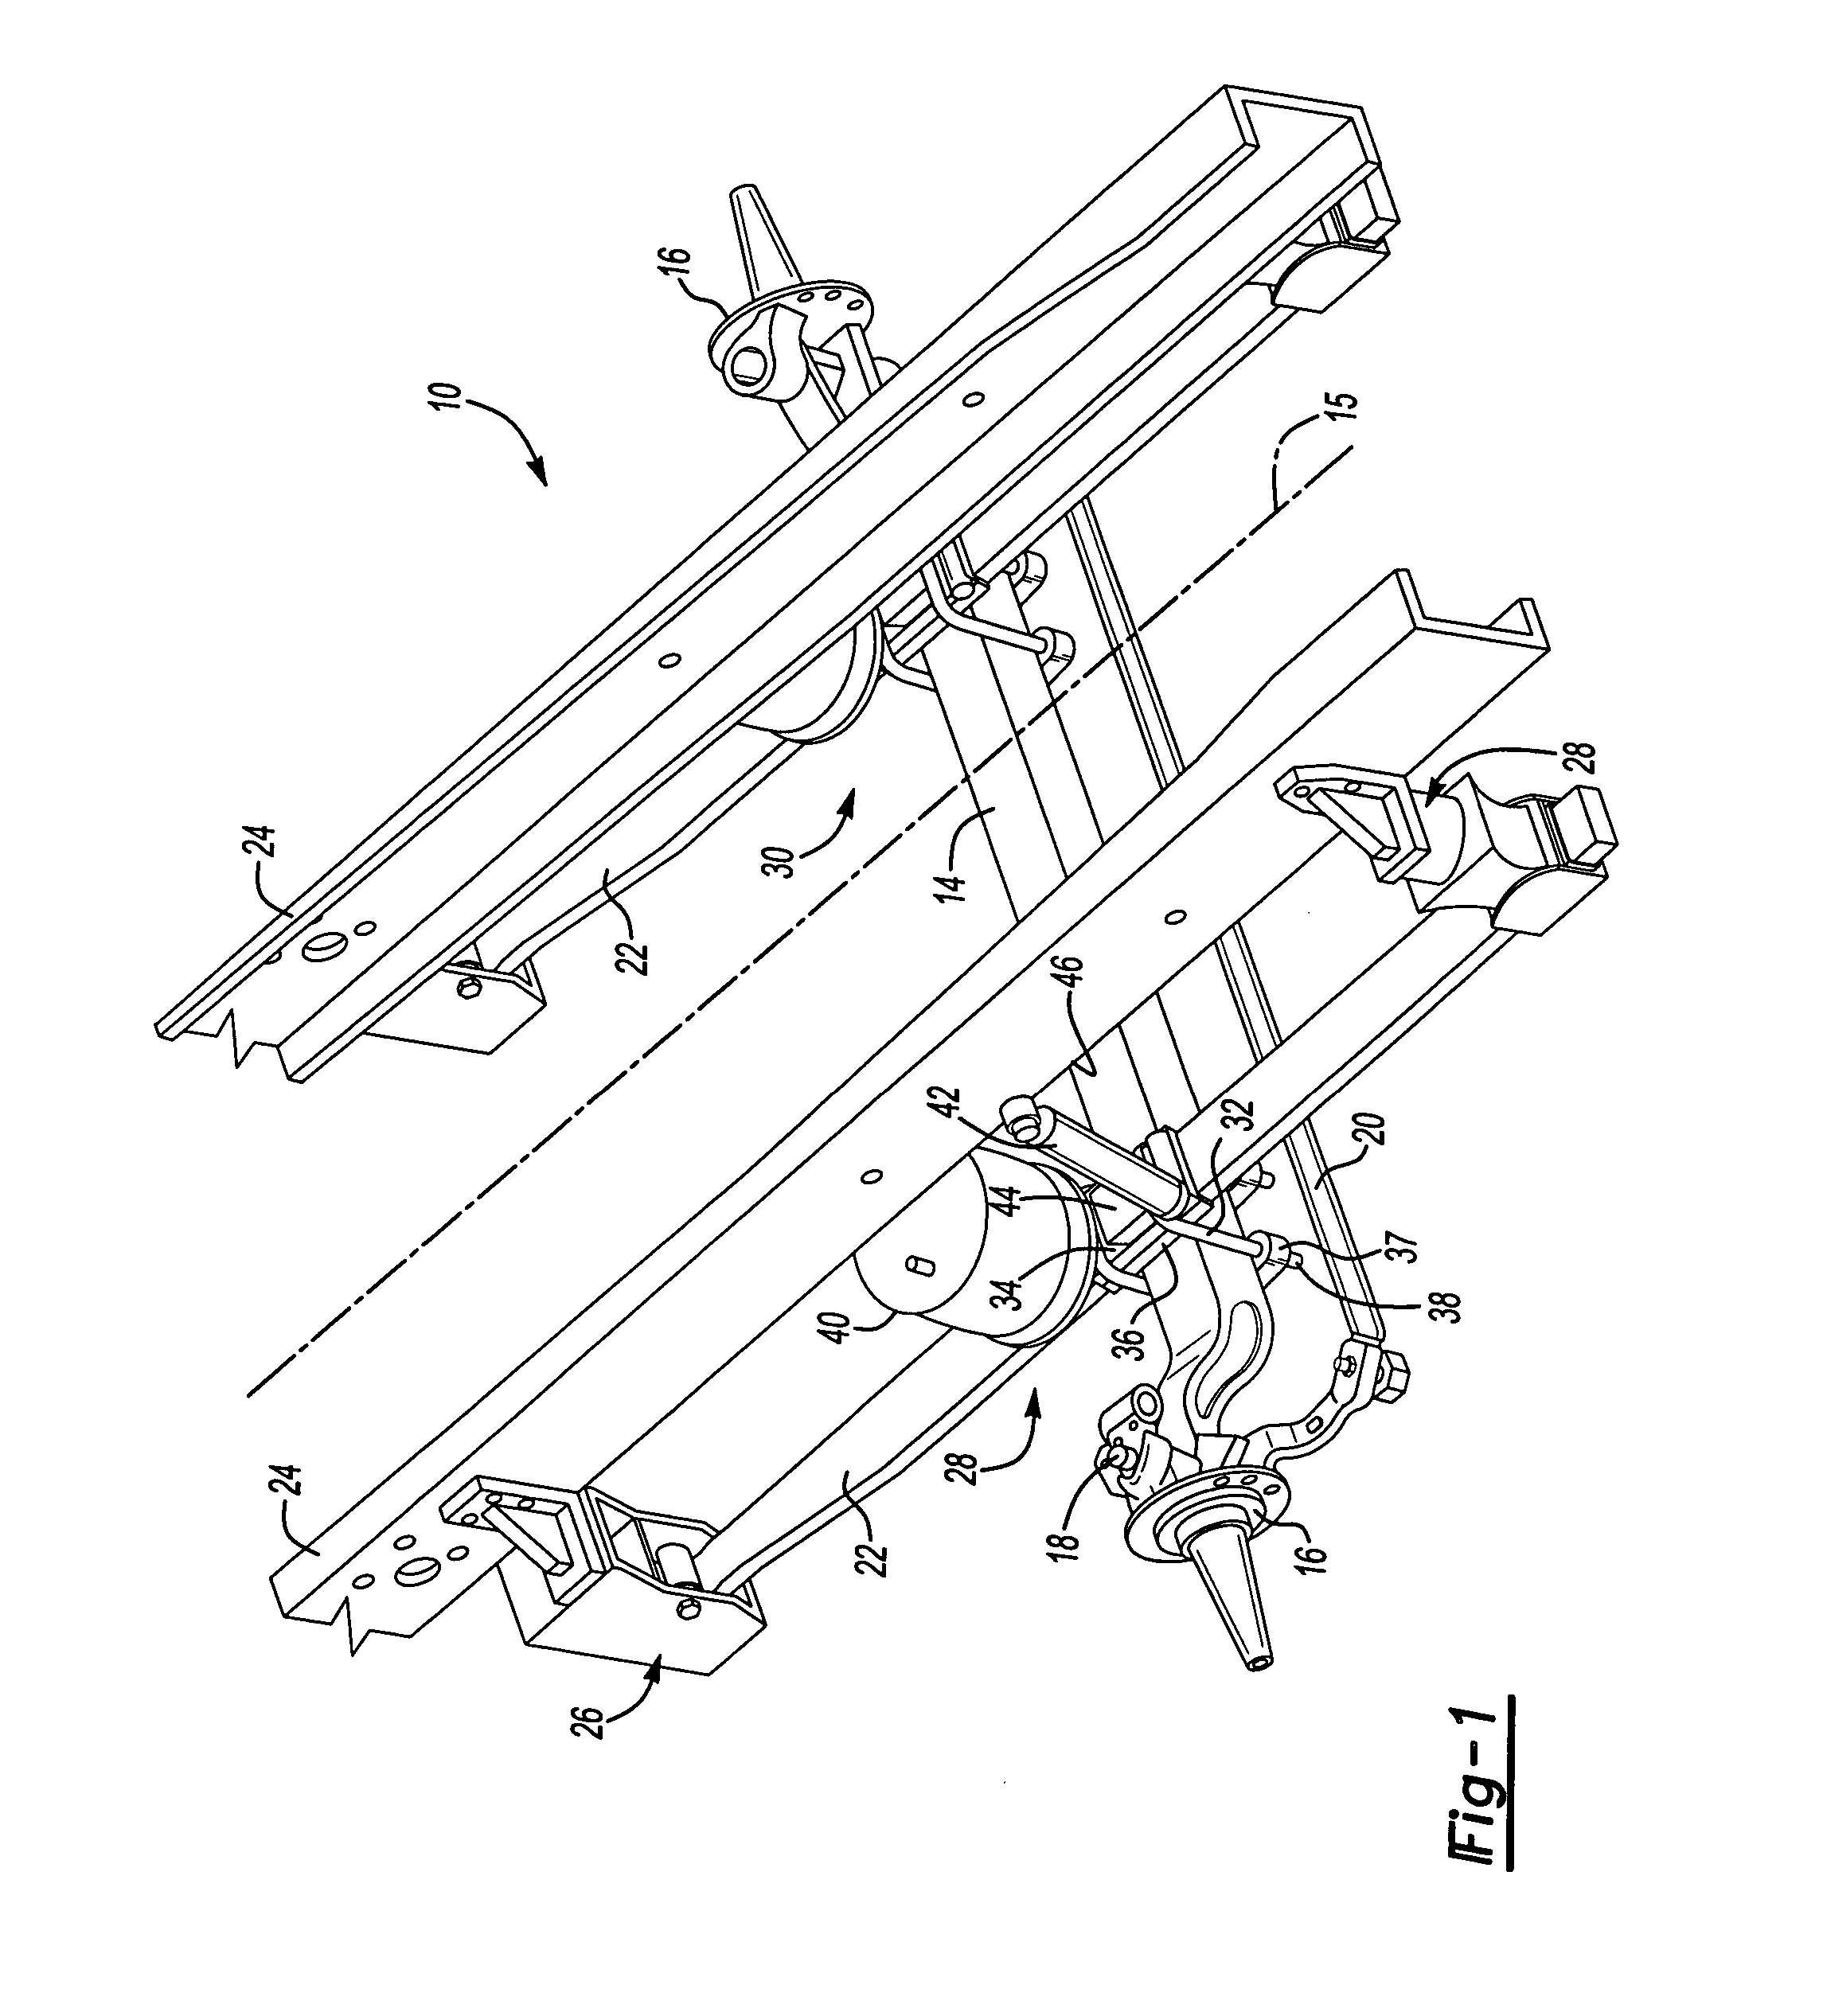 Composite leaf spring having an arcuate attachment arrangement for vehicle mounting